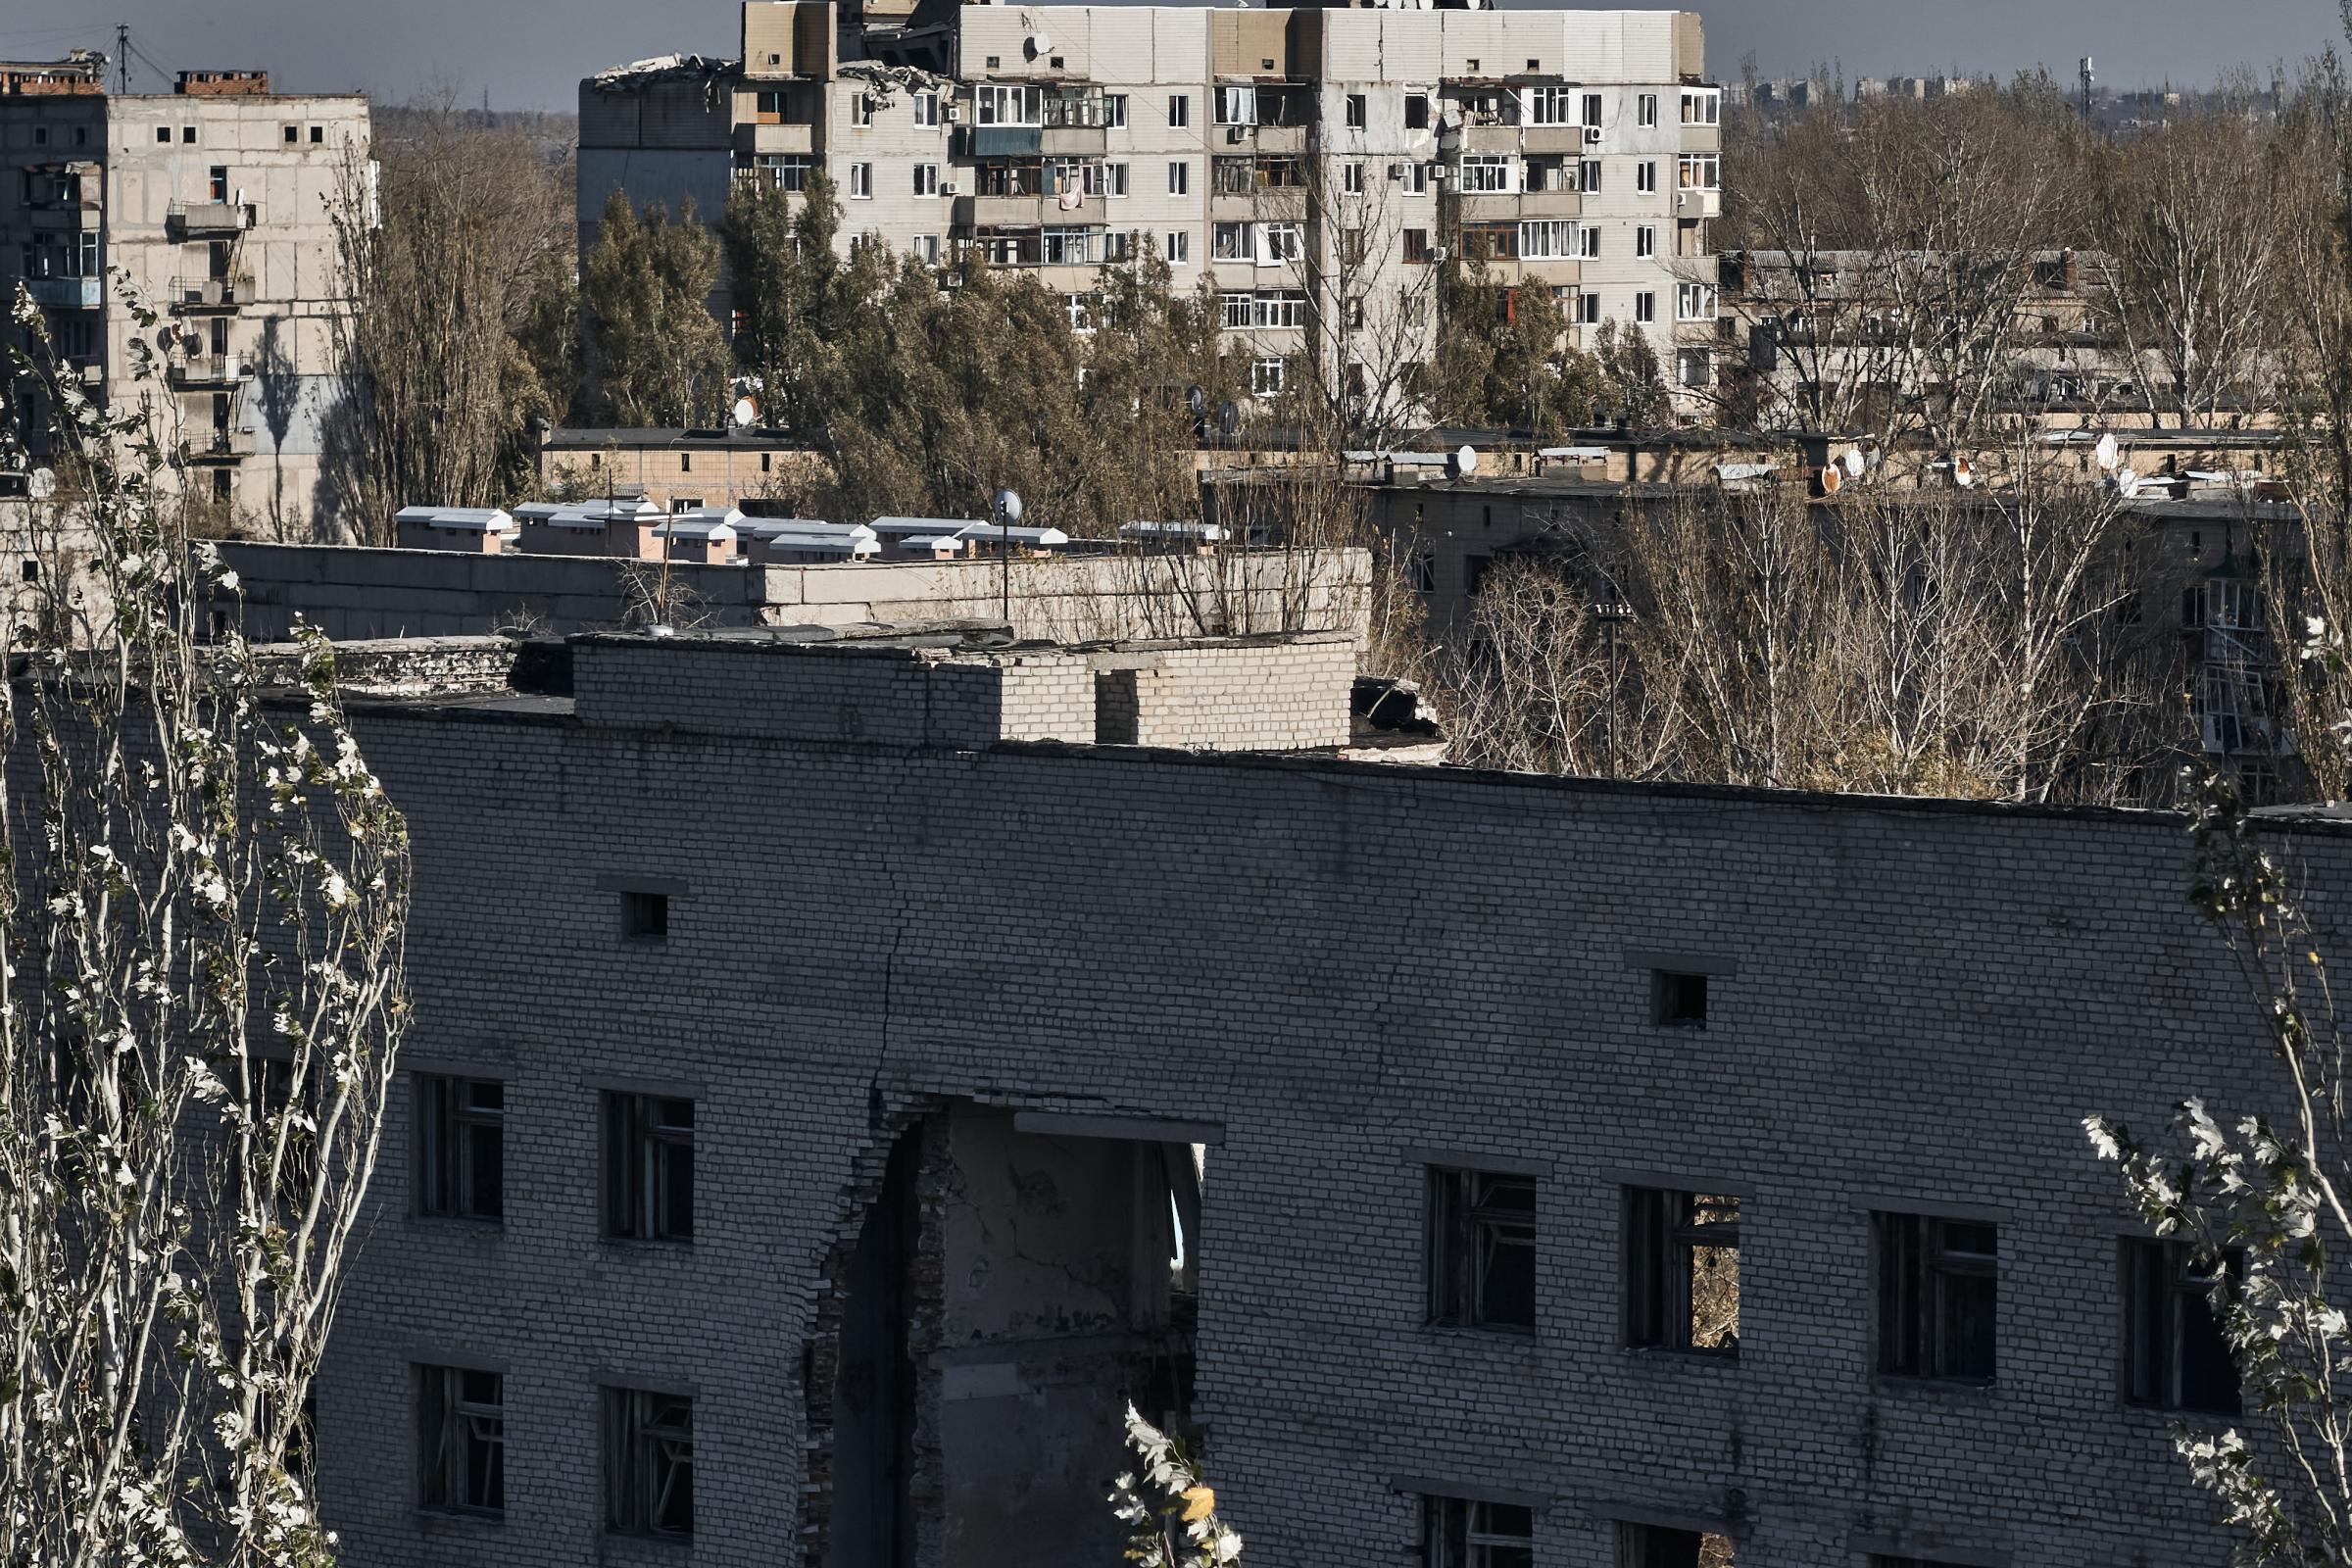 AVDIIVKA, UKRAINE - OCTOBER 30: A view of a destroyed building on October 30, 2023 in Avdiivka, Ukraine. The National Police of Ukraine, along with the White Angel special unit, is conducting an operation to evacuate the remaining local residents